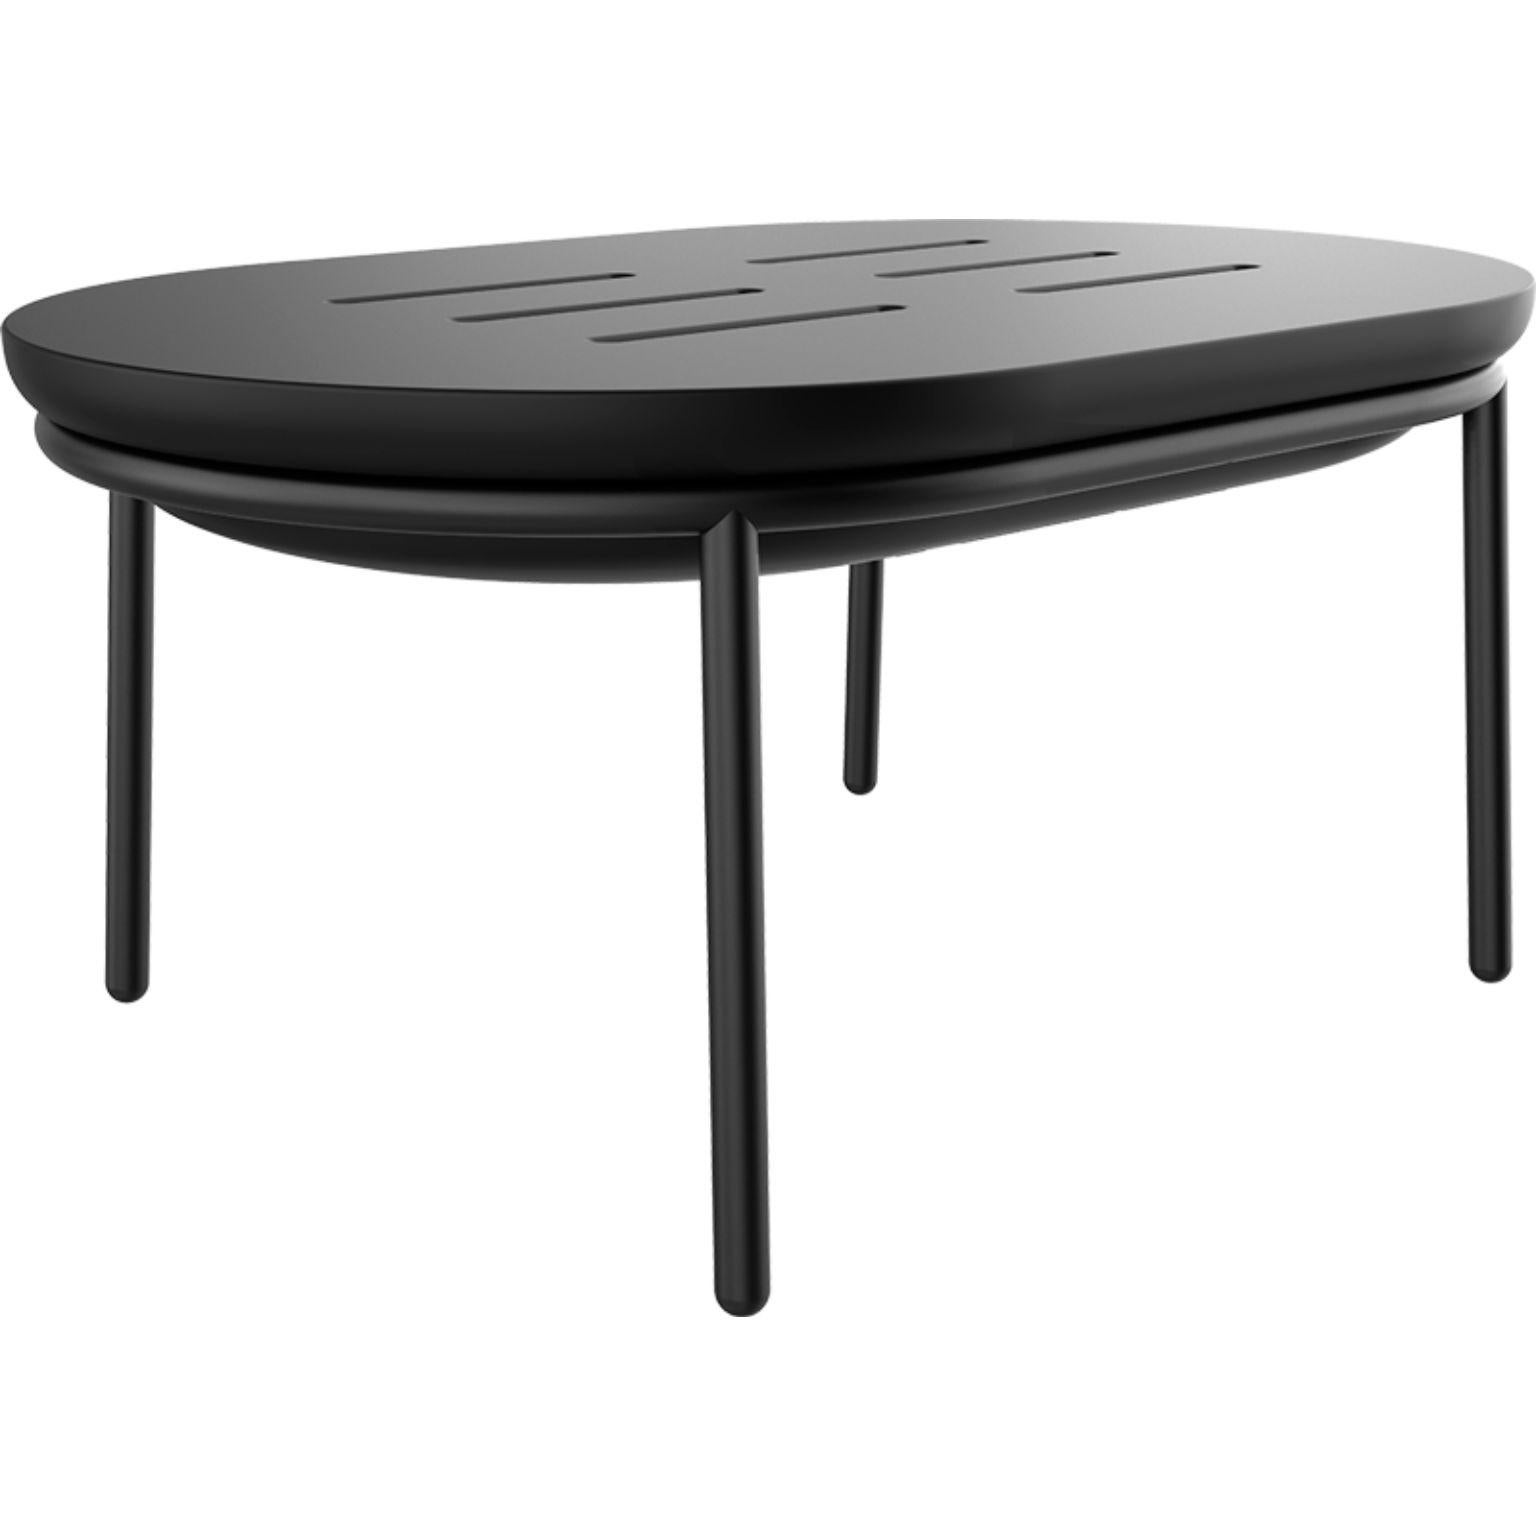 Lace black 90 low table by Mowee.
Dimensions: D60 x W90 x H41 cm.
Material: Polyethylene and stainless steel.
Weight: 9.2 kg.
Also Available in different colors and finishes (lacquered). 

Lace is a collection of furniture made by